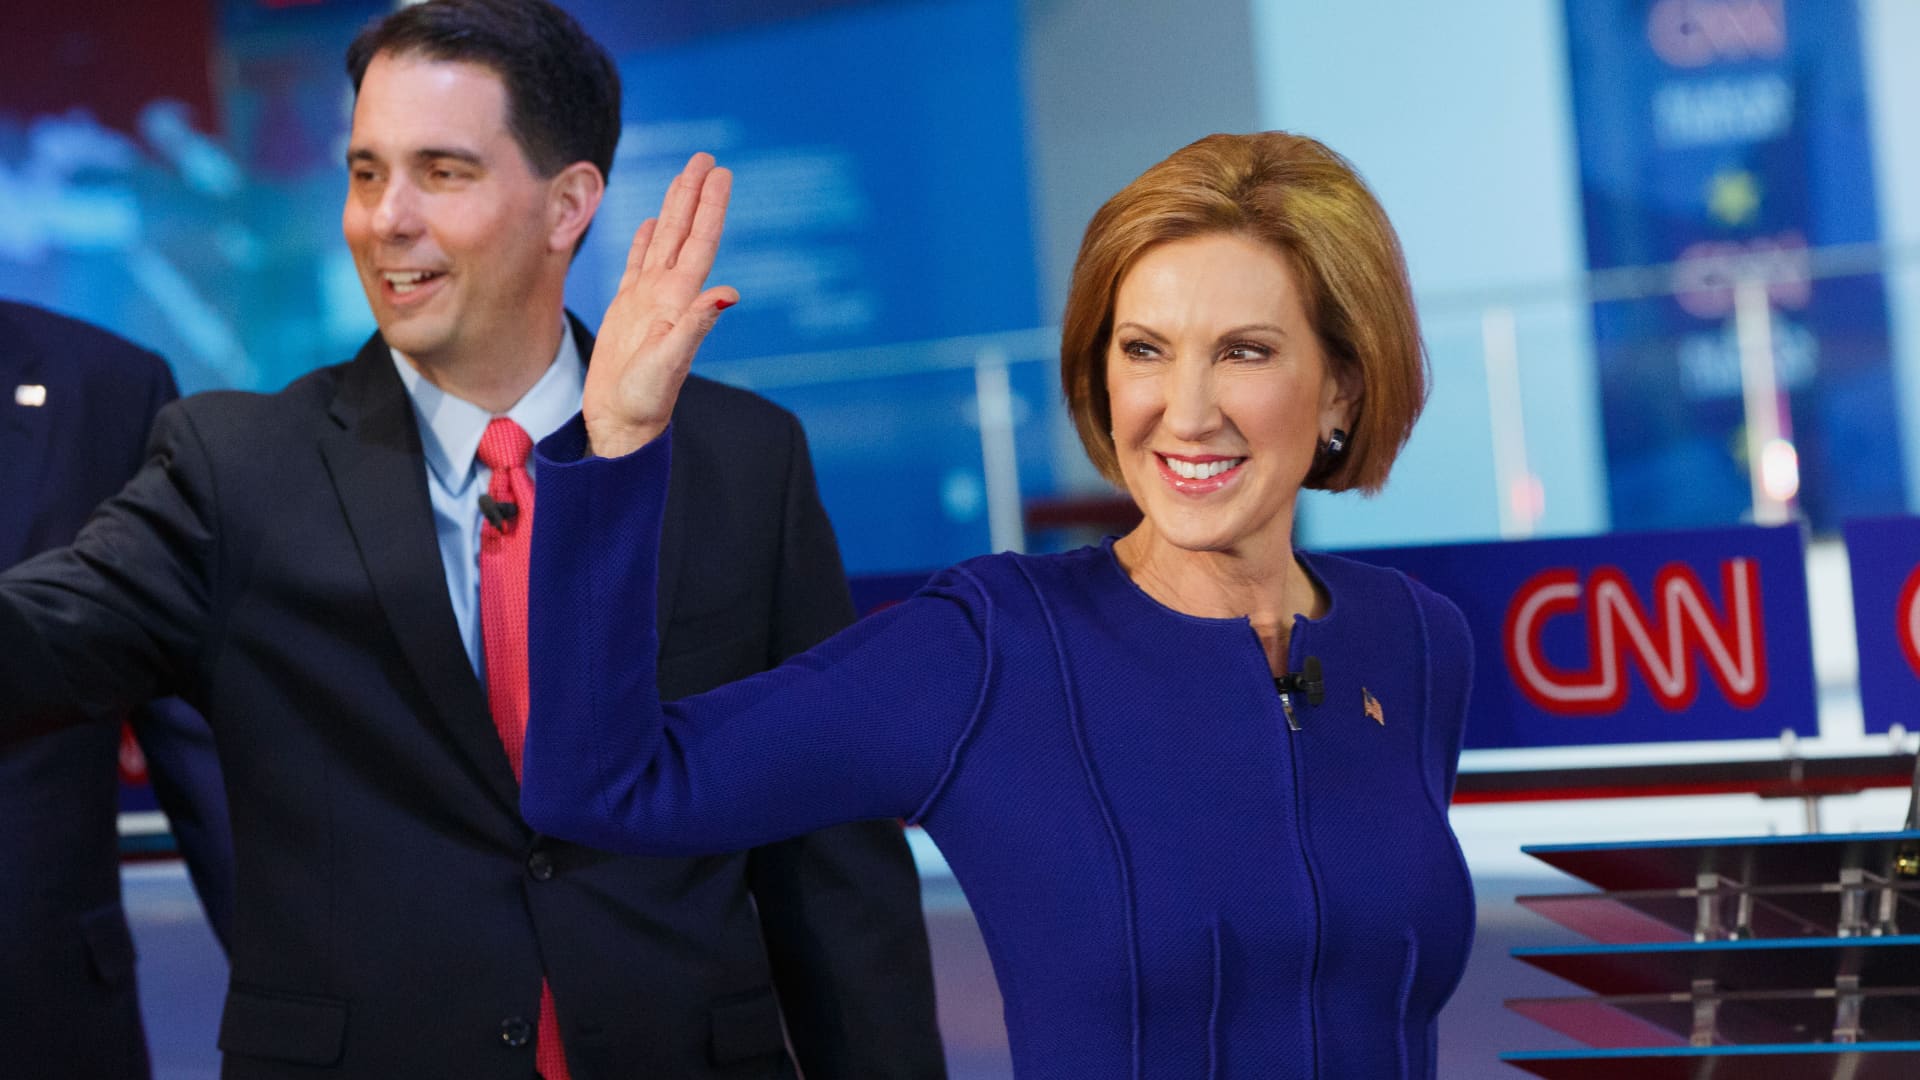 Republican presidential candidates Carly Fiorina, former chairman and chief executive officer of Hewlett-Packard Co., and Scott Walker, governor of Wisconsin, walk on stage during the Republican presidential debate at the Ronald Reagan Presidential Library in Simi Valley, California, Sept. 16, 2015.